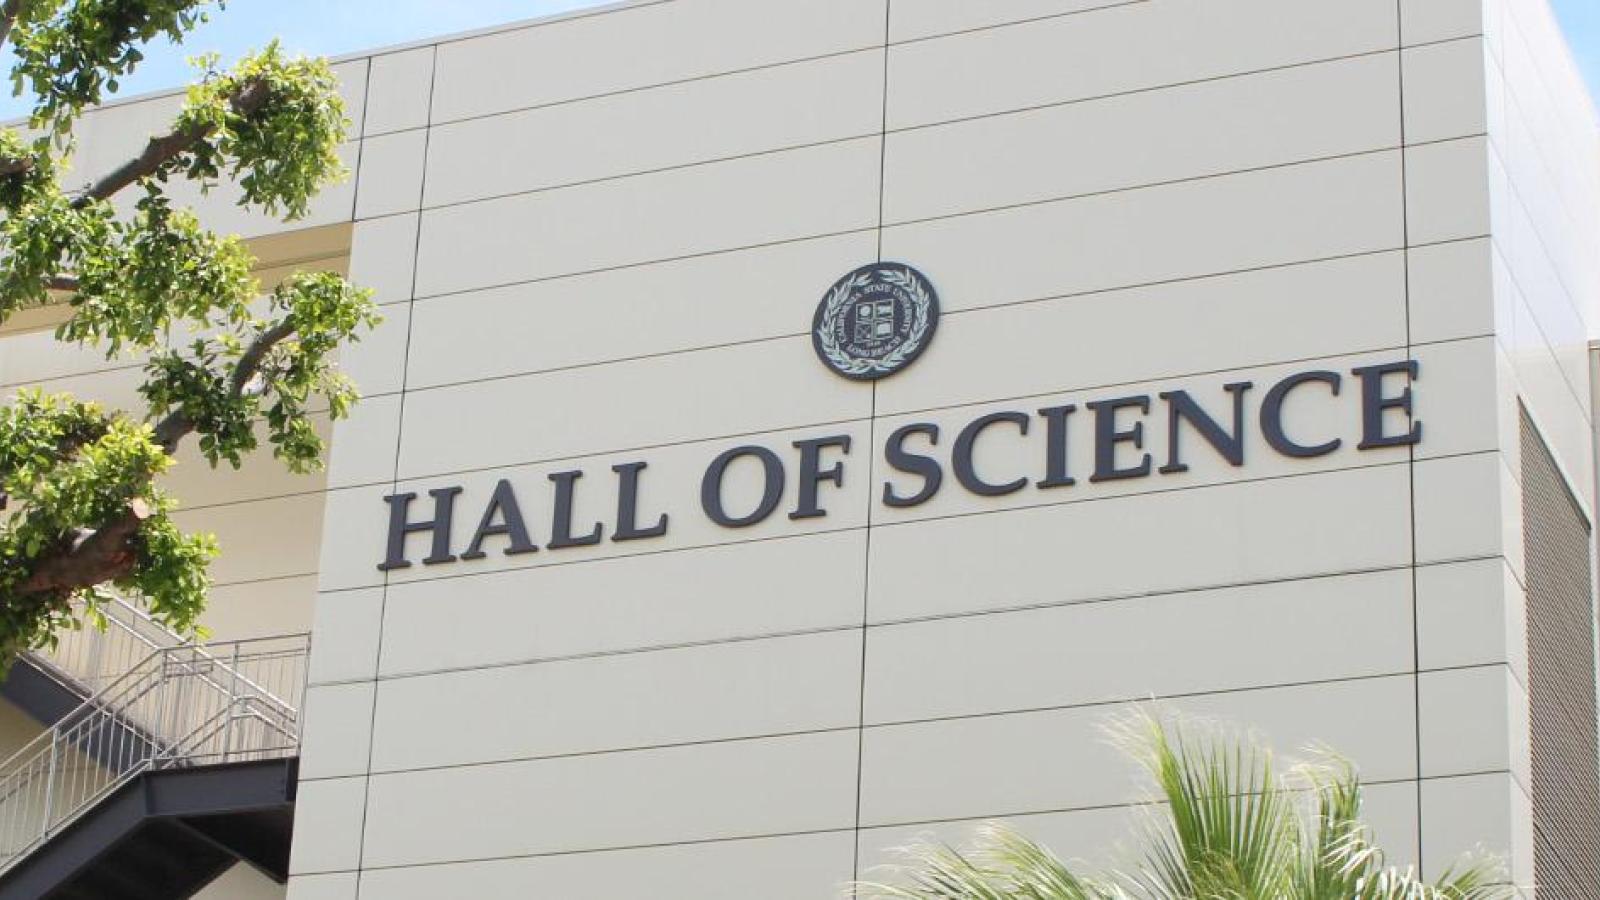 Hall of Science building